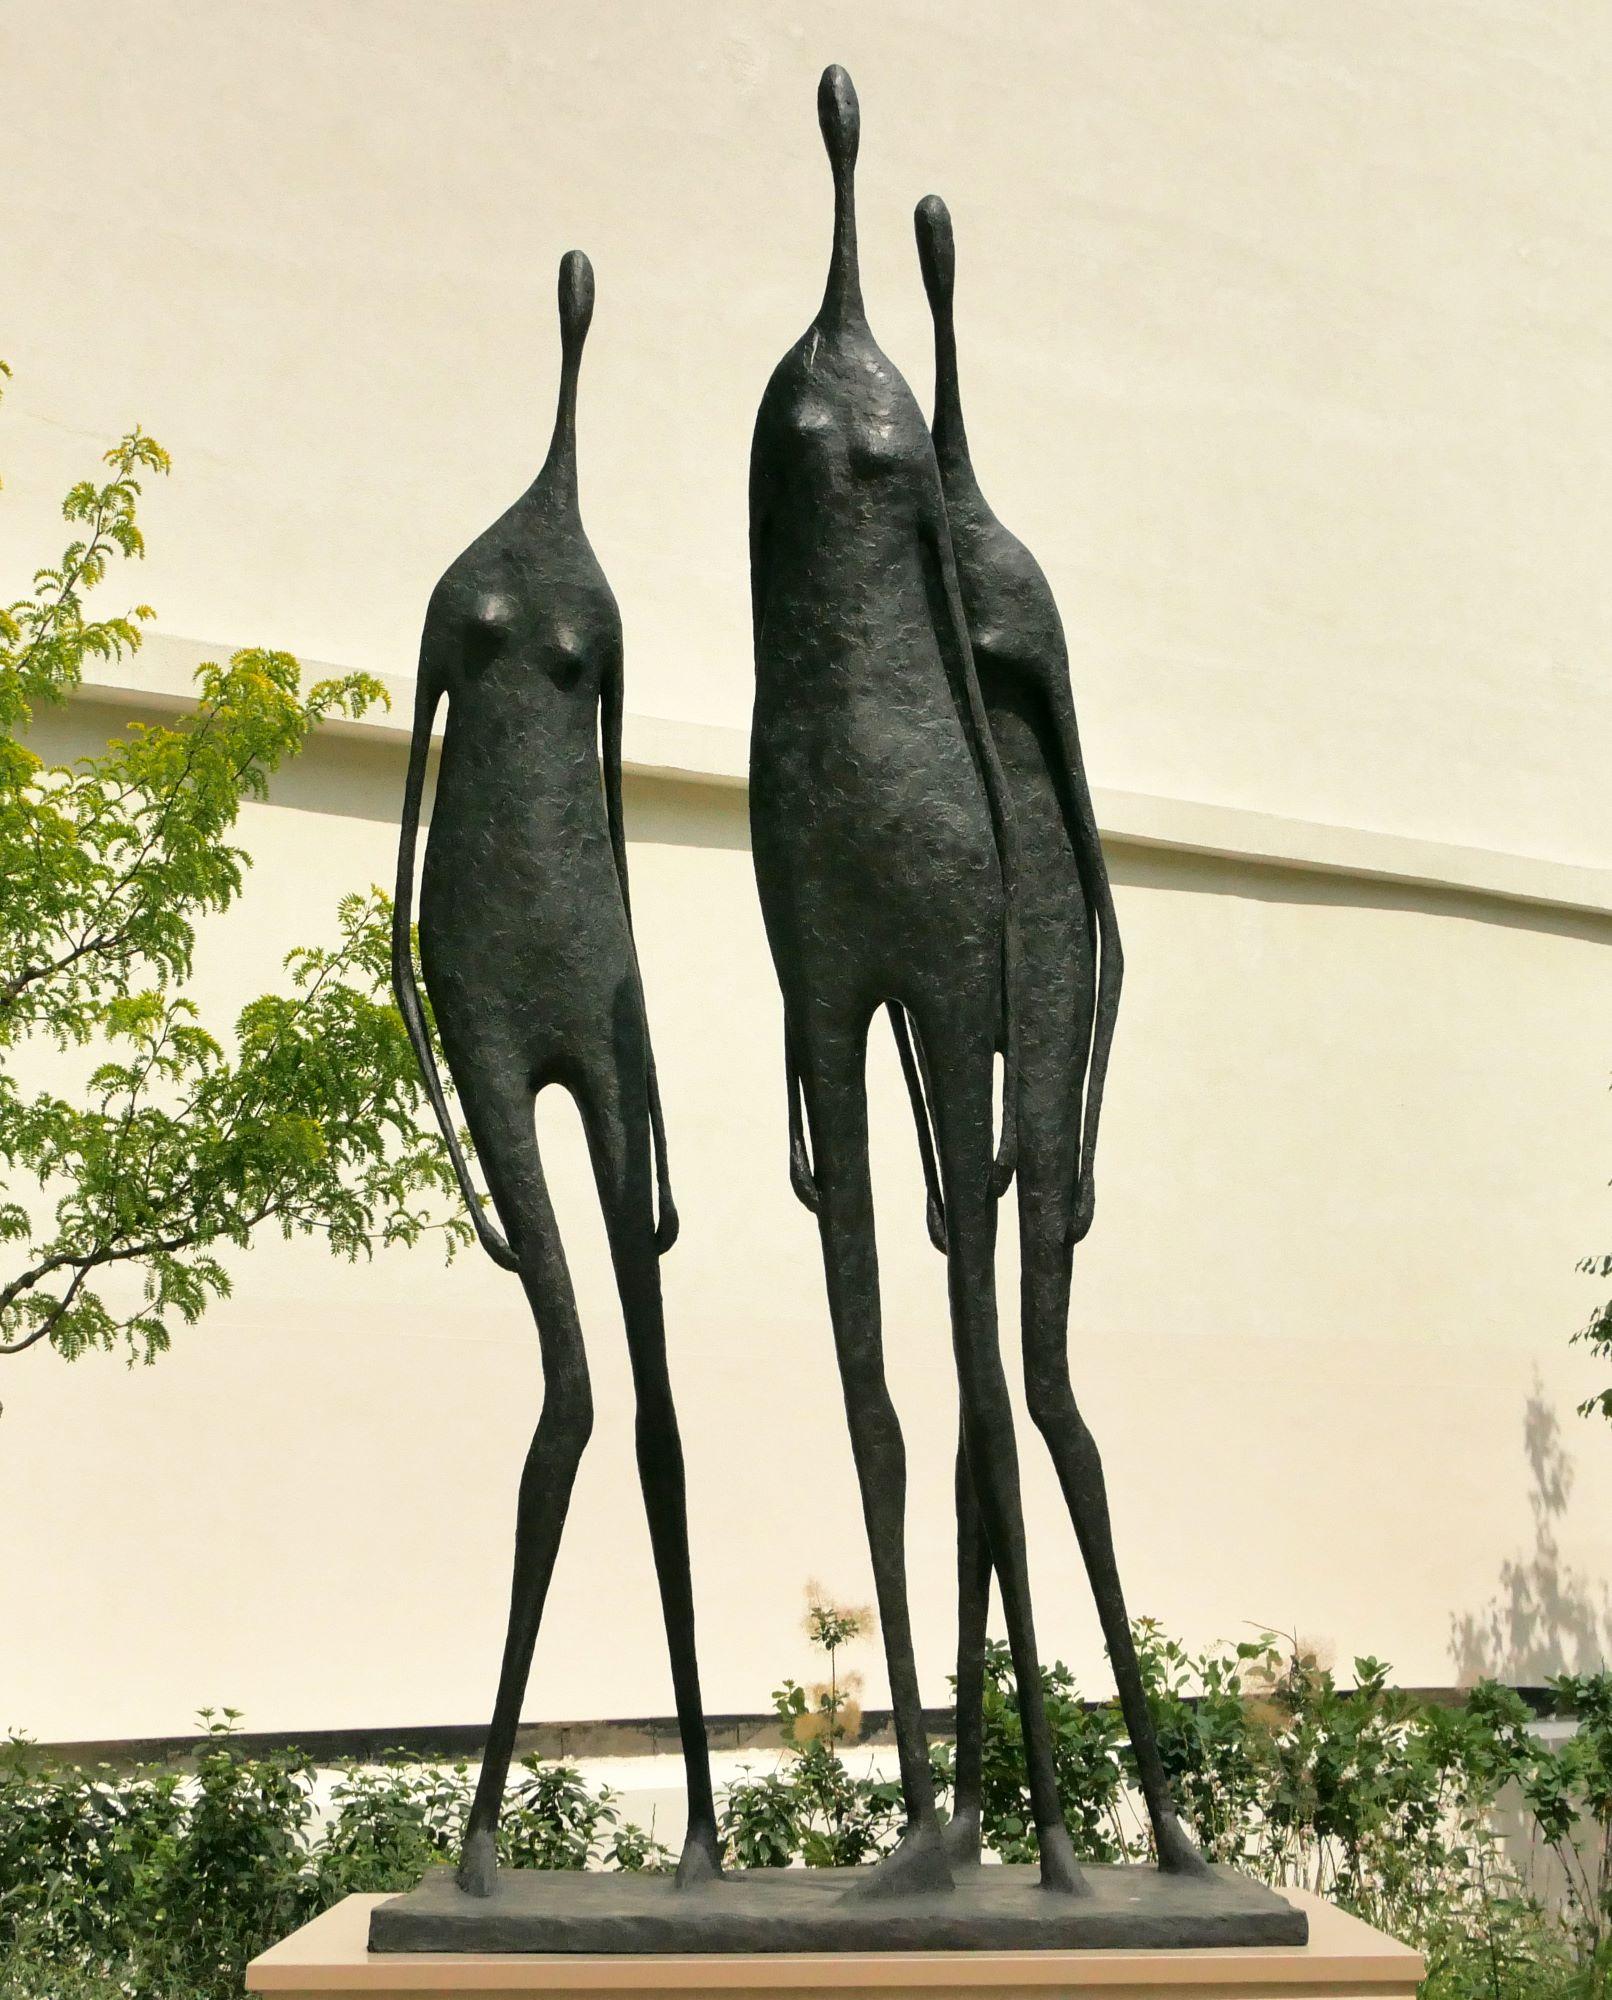 3 Monumental Standing Figures is a bronze sculpture by French contemporary artist Pierre Yermia, dimensions are 320 × 150 × 130 cm (126 × 59.1 × 51.2 in).  
The sculpture is signed and numbered, it is part of a limited edition of 8 editions + 4